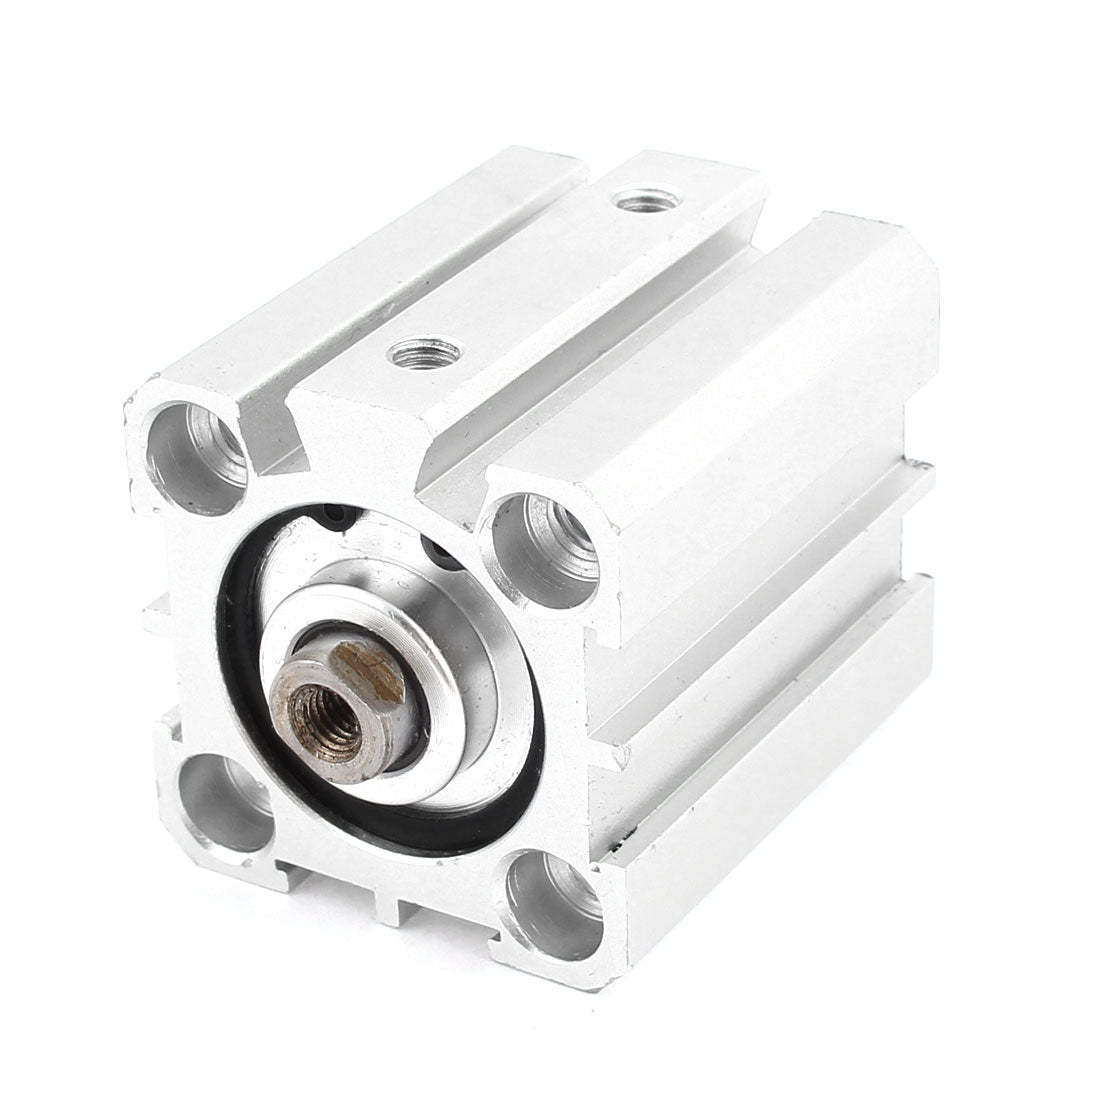 uxcell Uxcell SDA25x25 25mm Bore 25mm Stroke Double Action Single Rod Pneumatic Air Cylinder